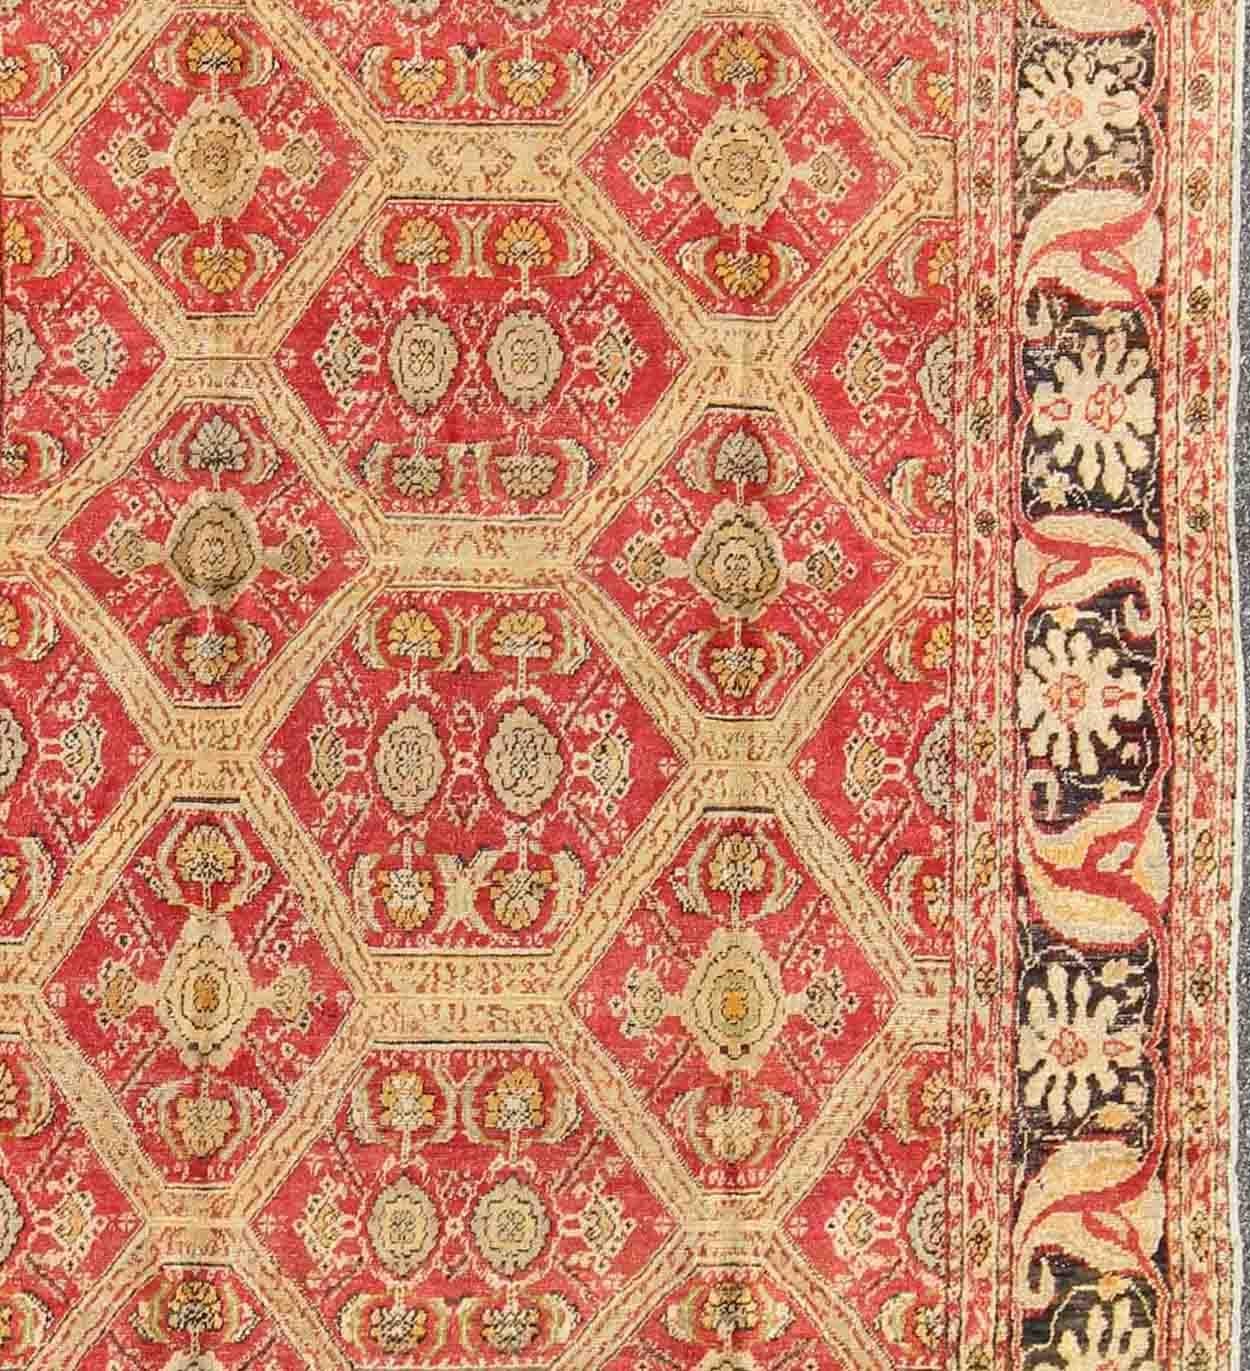 Measures: 6'6'' x 8'8''.

This magnificent Turkish rug displays a glorious coloration paired with superlative all-over sub-geometric design. The delightful hues of red and brown work together to form a rich palette of contrasting colors while the